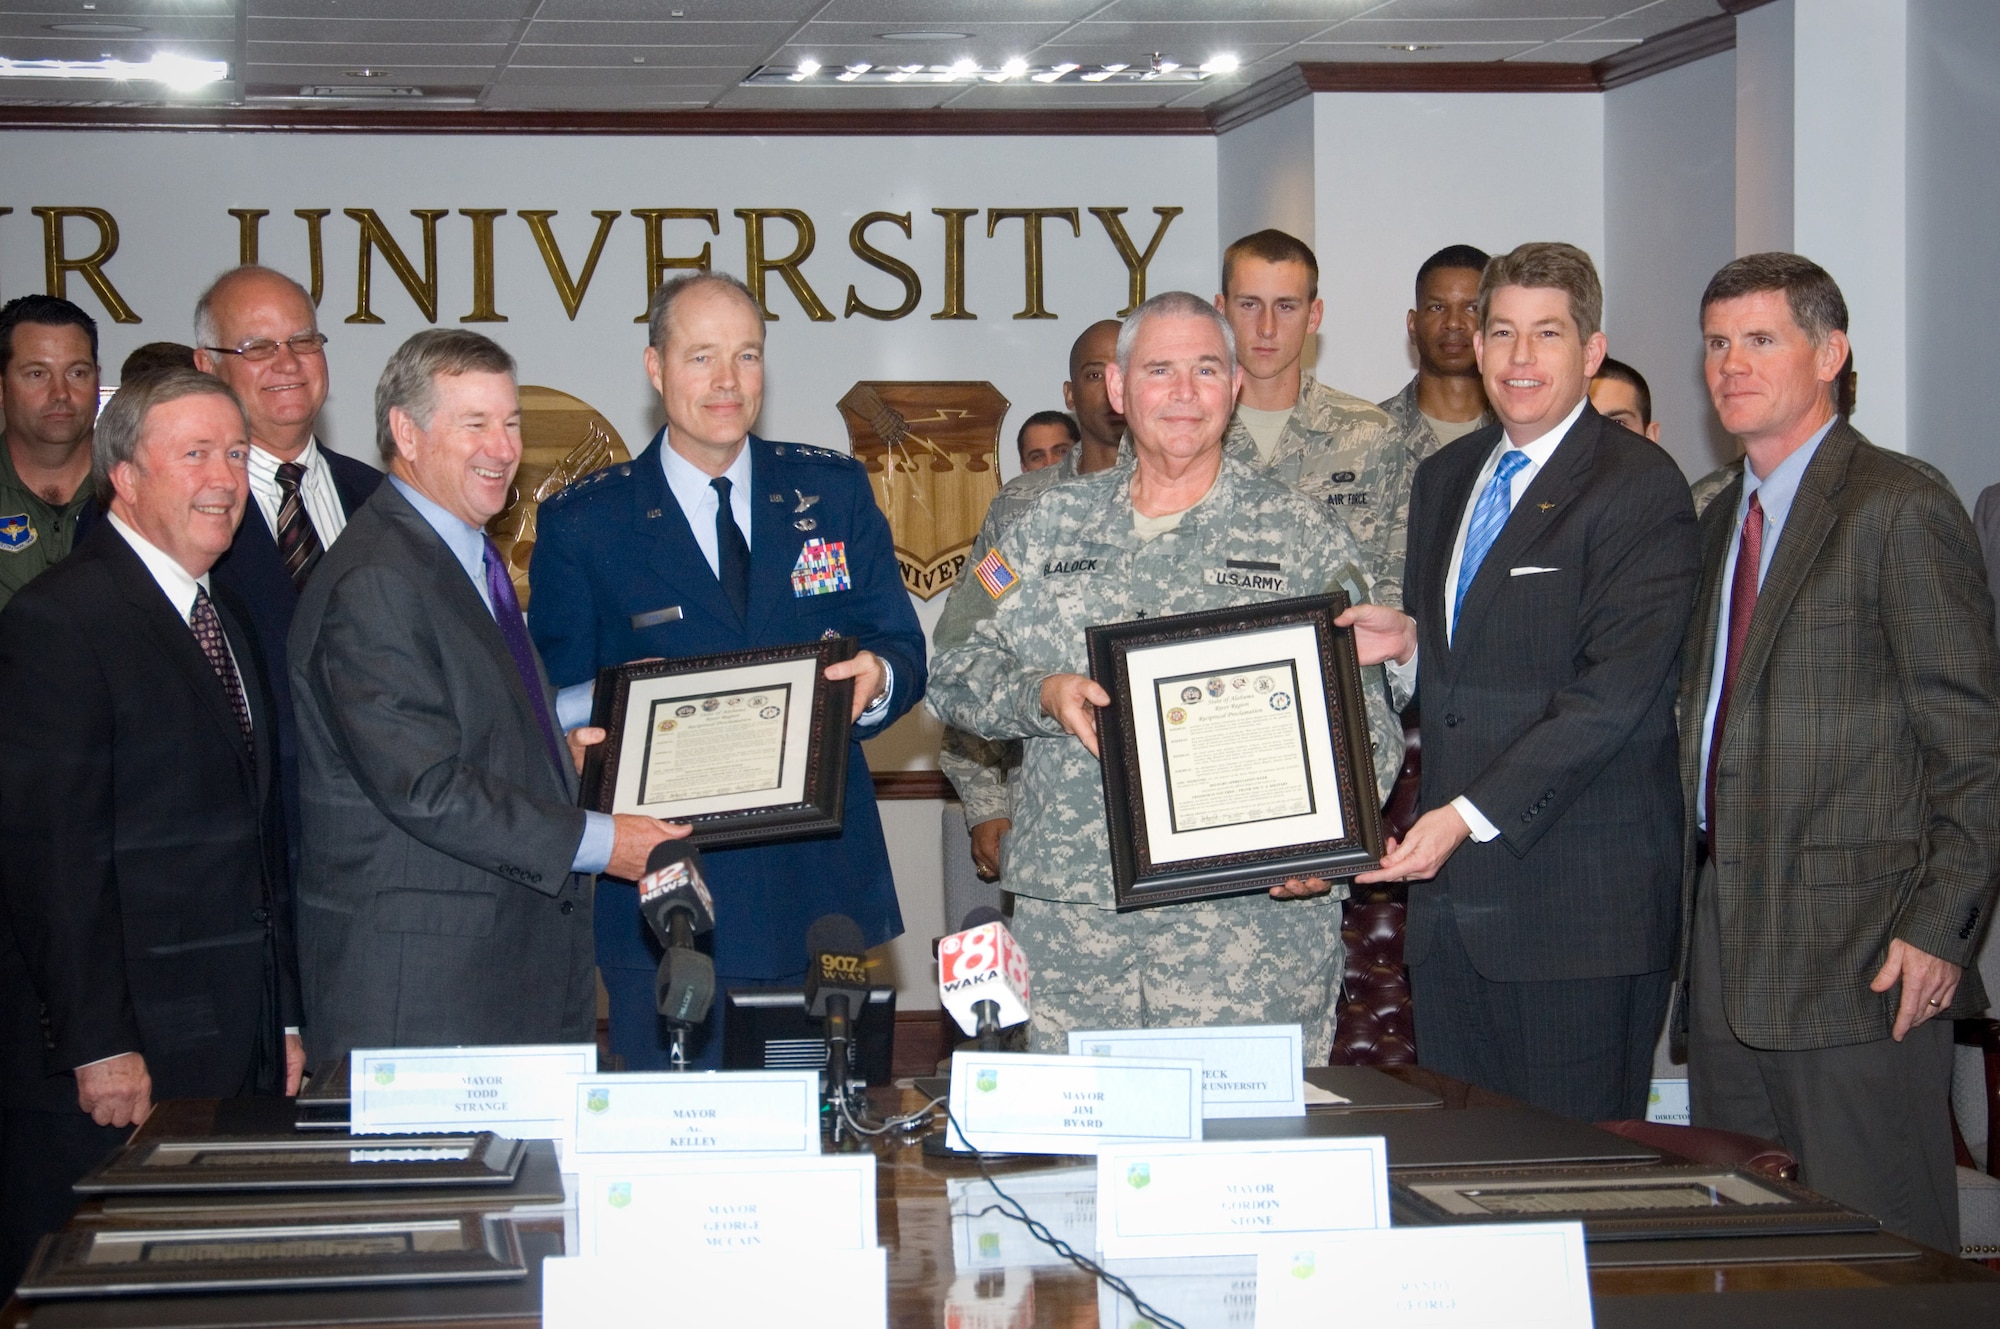 Five mayors from the River Region paid a special visit to Maxwell to present a joint proclamation designating Nov. 8-14 as Military Appreciation Week. Receiving the proclamation were commanders from the surrounding area that included Air University, 42nd Air Base Wing, the Air Force Reserve and the Alabama National Guard. “To better inform the River Region citizens about the importance of our military neighbors,” the proclamation also authorized businesses to display banners “recognizing the impact our military and their families have on our communities as we recognize their sacrifice, support and dedication.” Shown from left are Tallessee Mayor George McCain, Millbrook Mayor Al Kelley, Montgomery Mayor Todd Strange, Air University Commander Lt. Gen. Allen G. Peck, Alabama National Guard Adjutant General Maj. Gen. A.C. Blalock, Prattville Mayor Jim Byard Jr., and Pike Road Mayor Gordon Stone. Not pictured, but also signing the proclamation, is Wetumpka Mayor Jerry Willis. (U.S. Air Force photo/Melanie Rodgers Cox)

